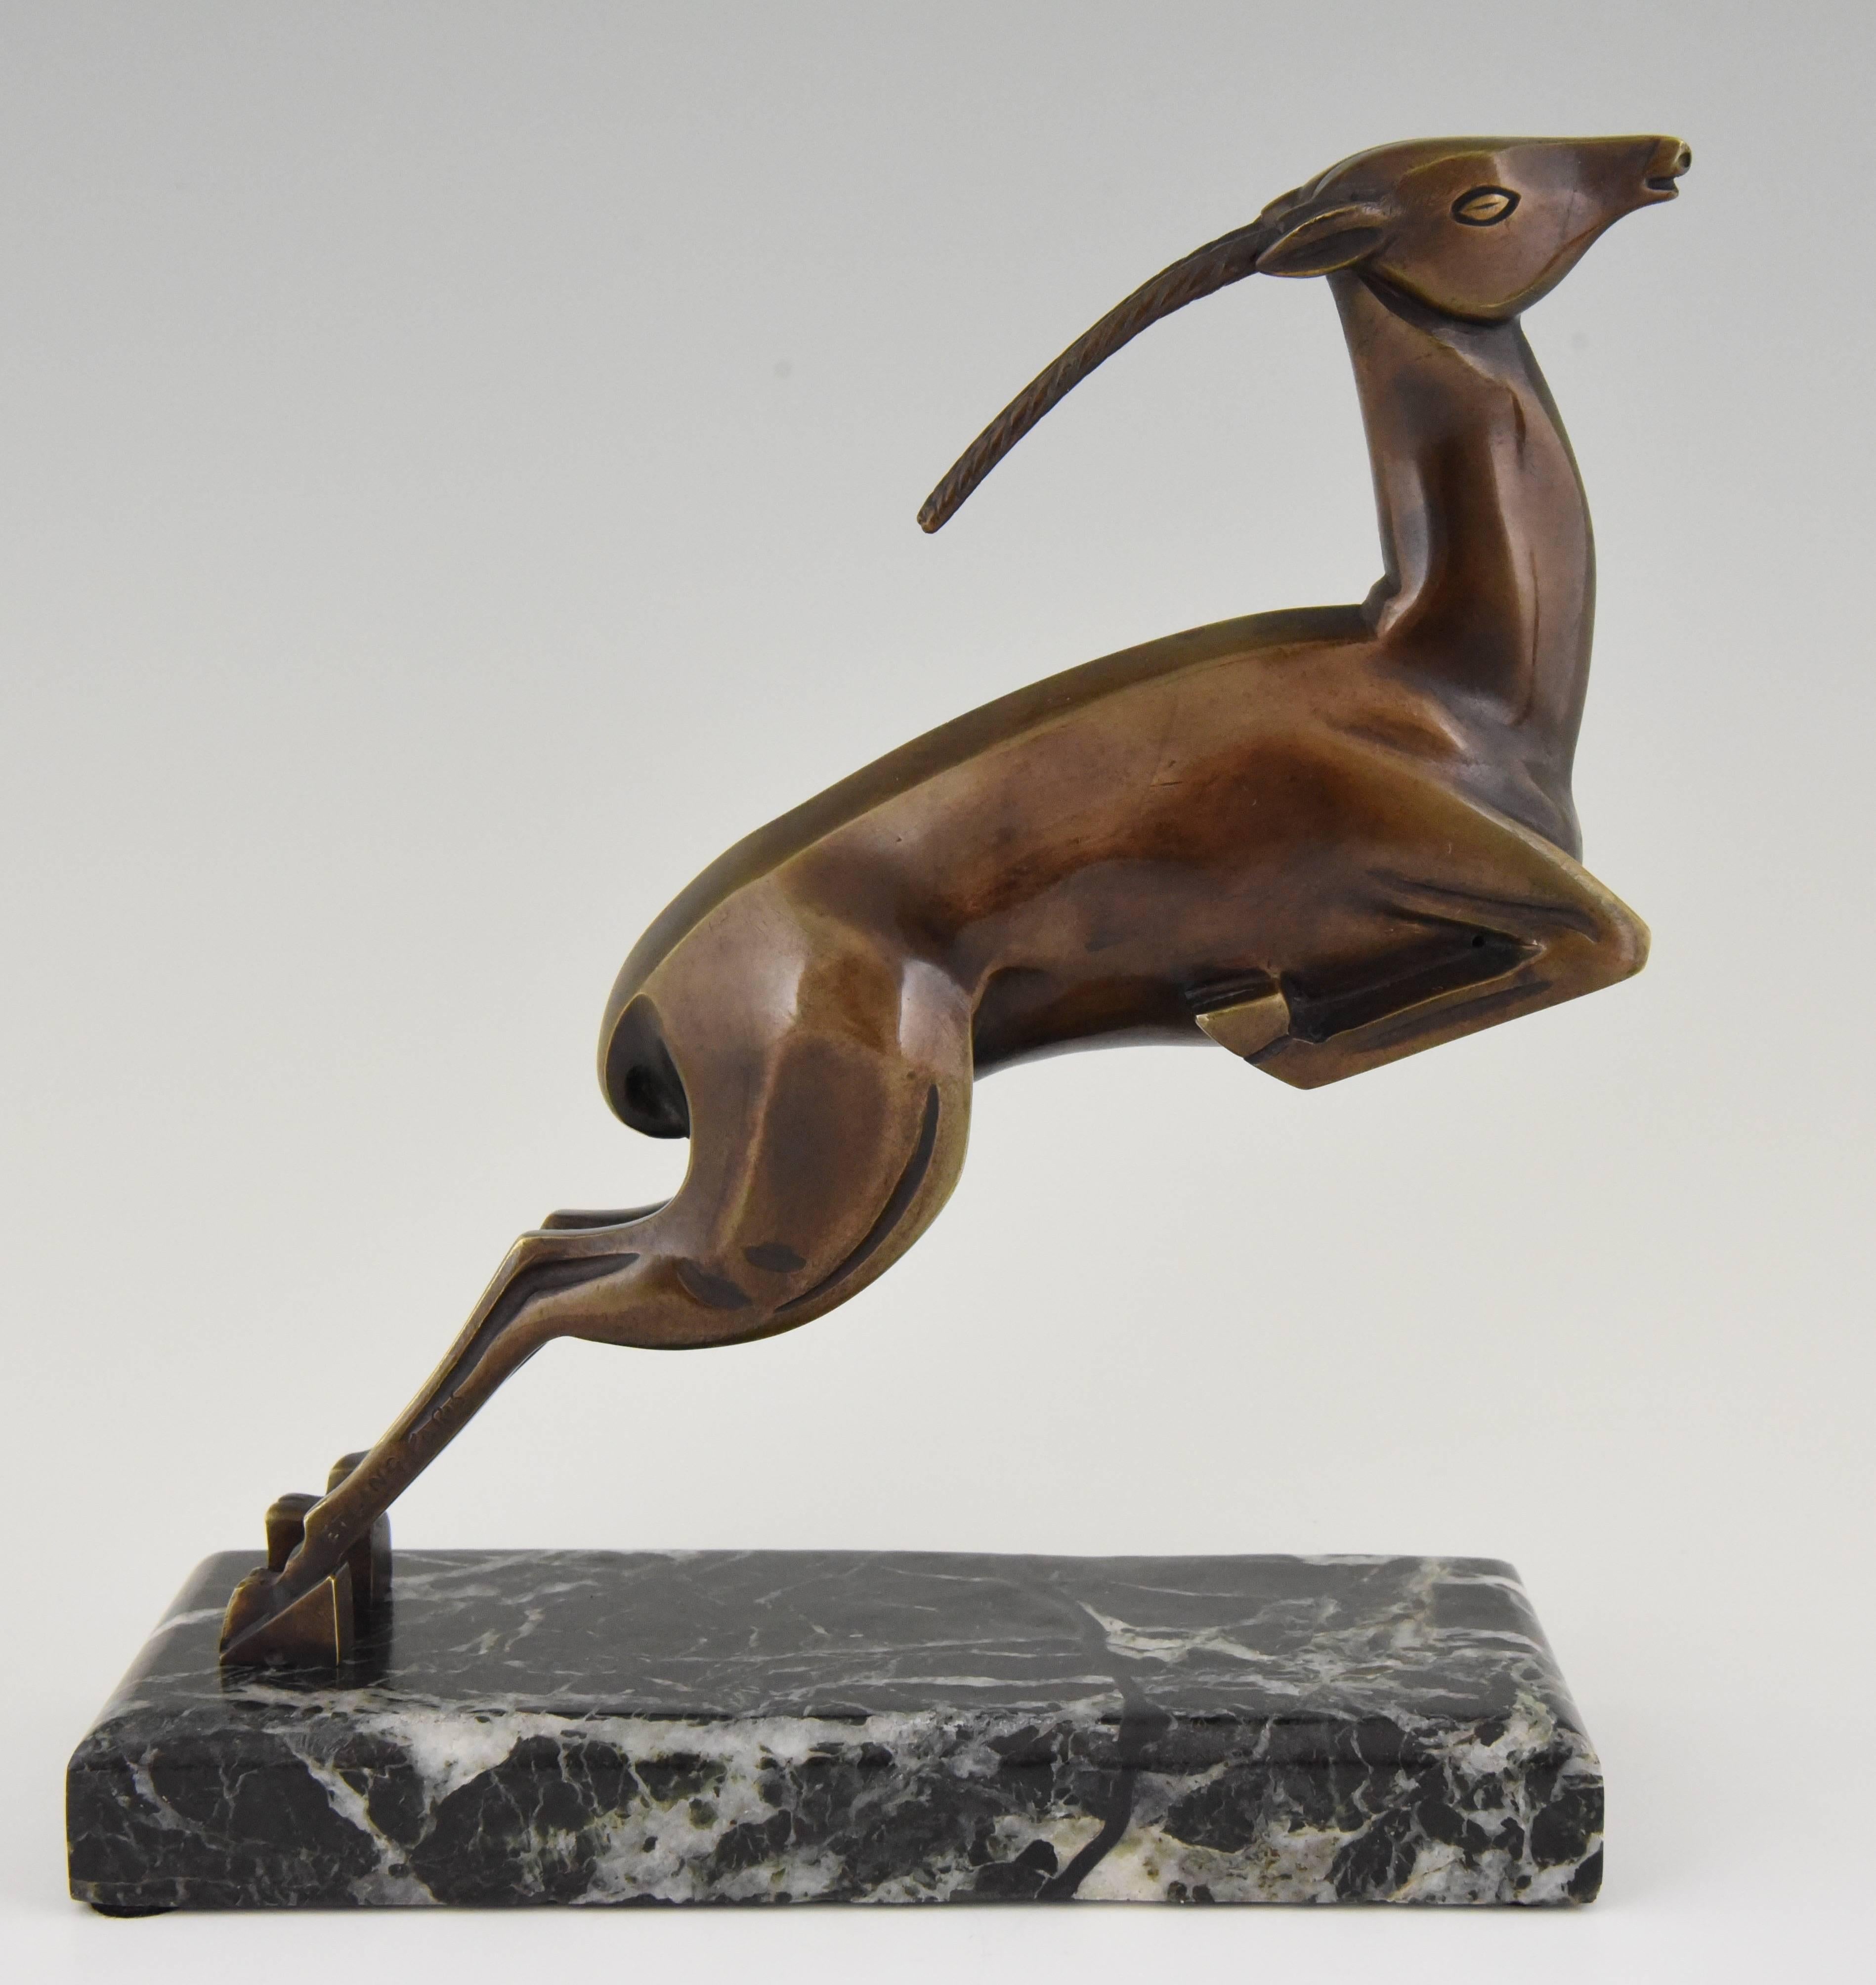 20th Century Art Deco Bronze Leaping Gazelle Bookends by Marcel Andre Bouraine, 1930 France